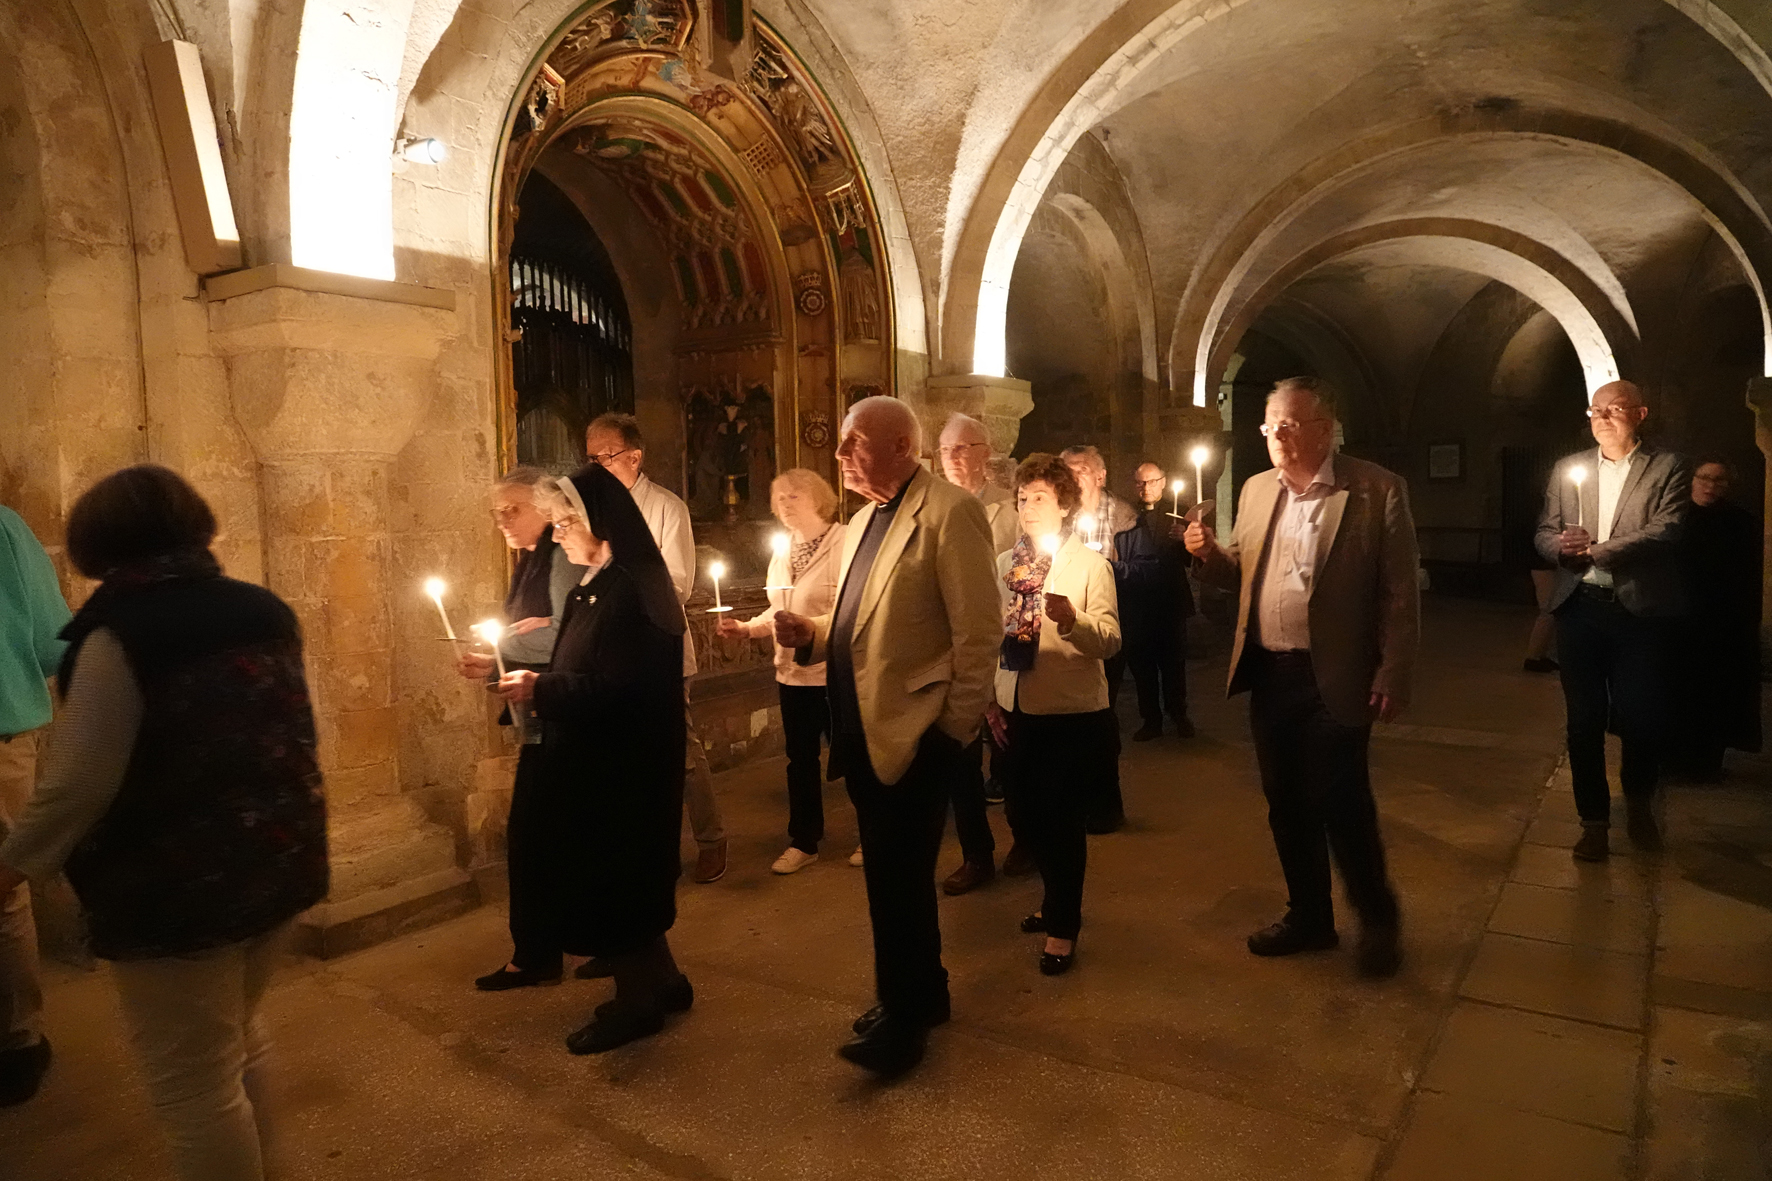 pilgrims walking through the Cathedral crypt in candlelight